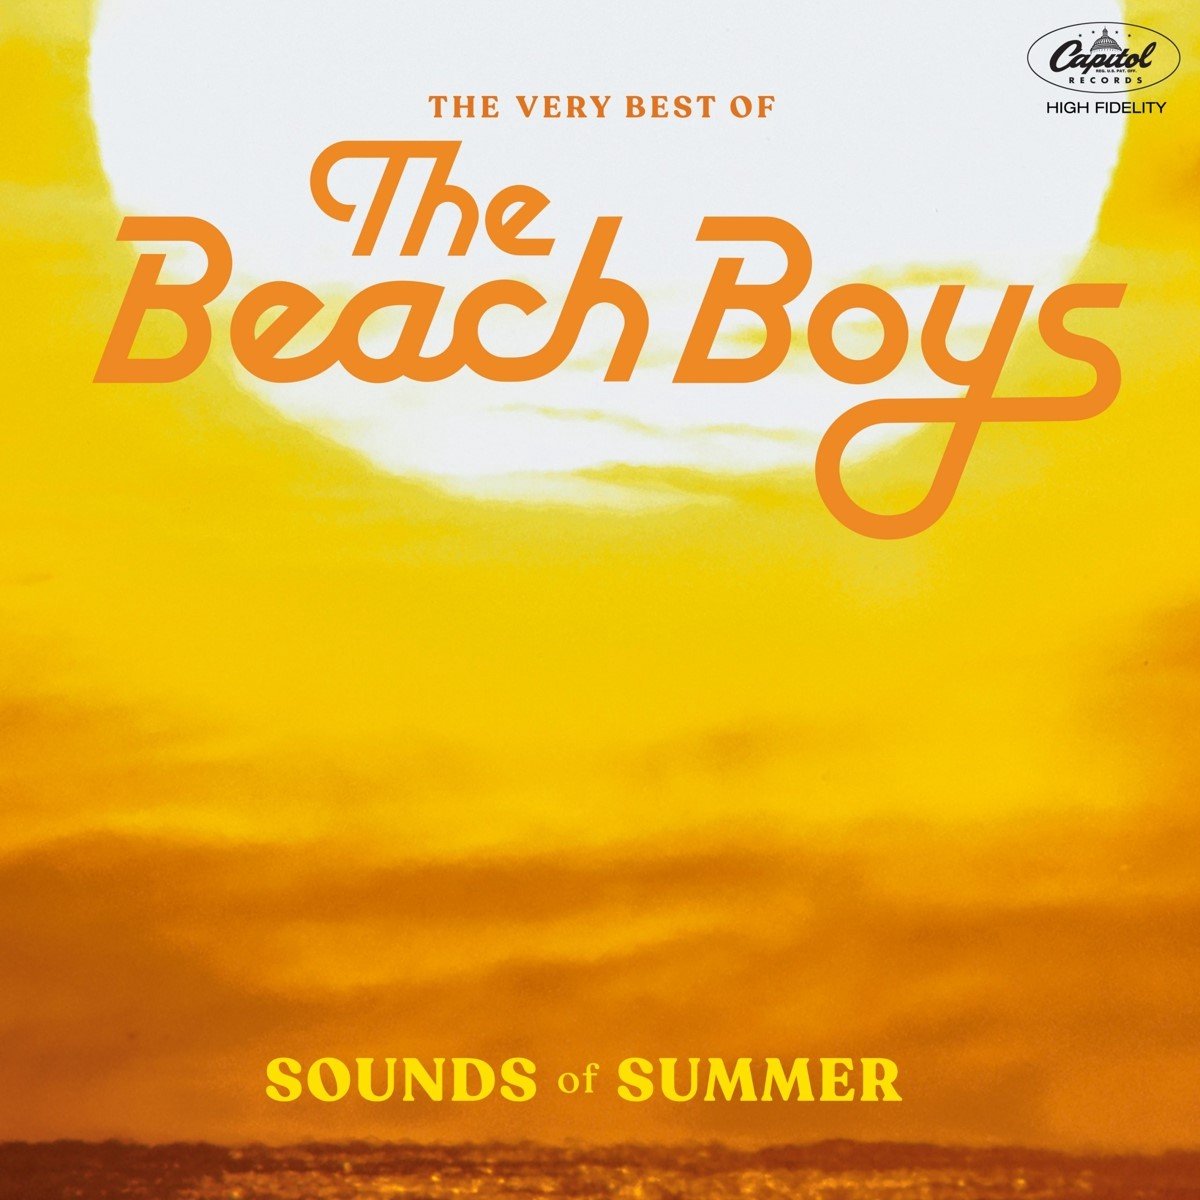 The Beach Boys - The Very Best Of (Sounds Of Summer) (2LP)